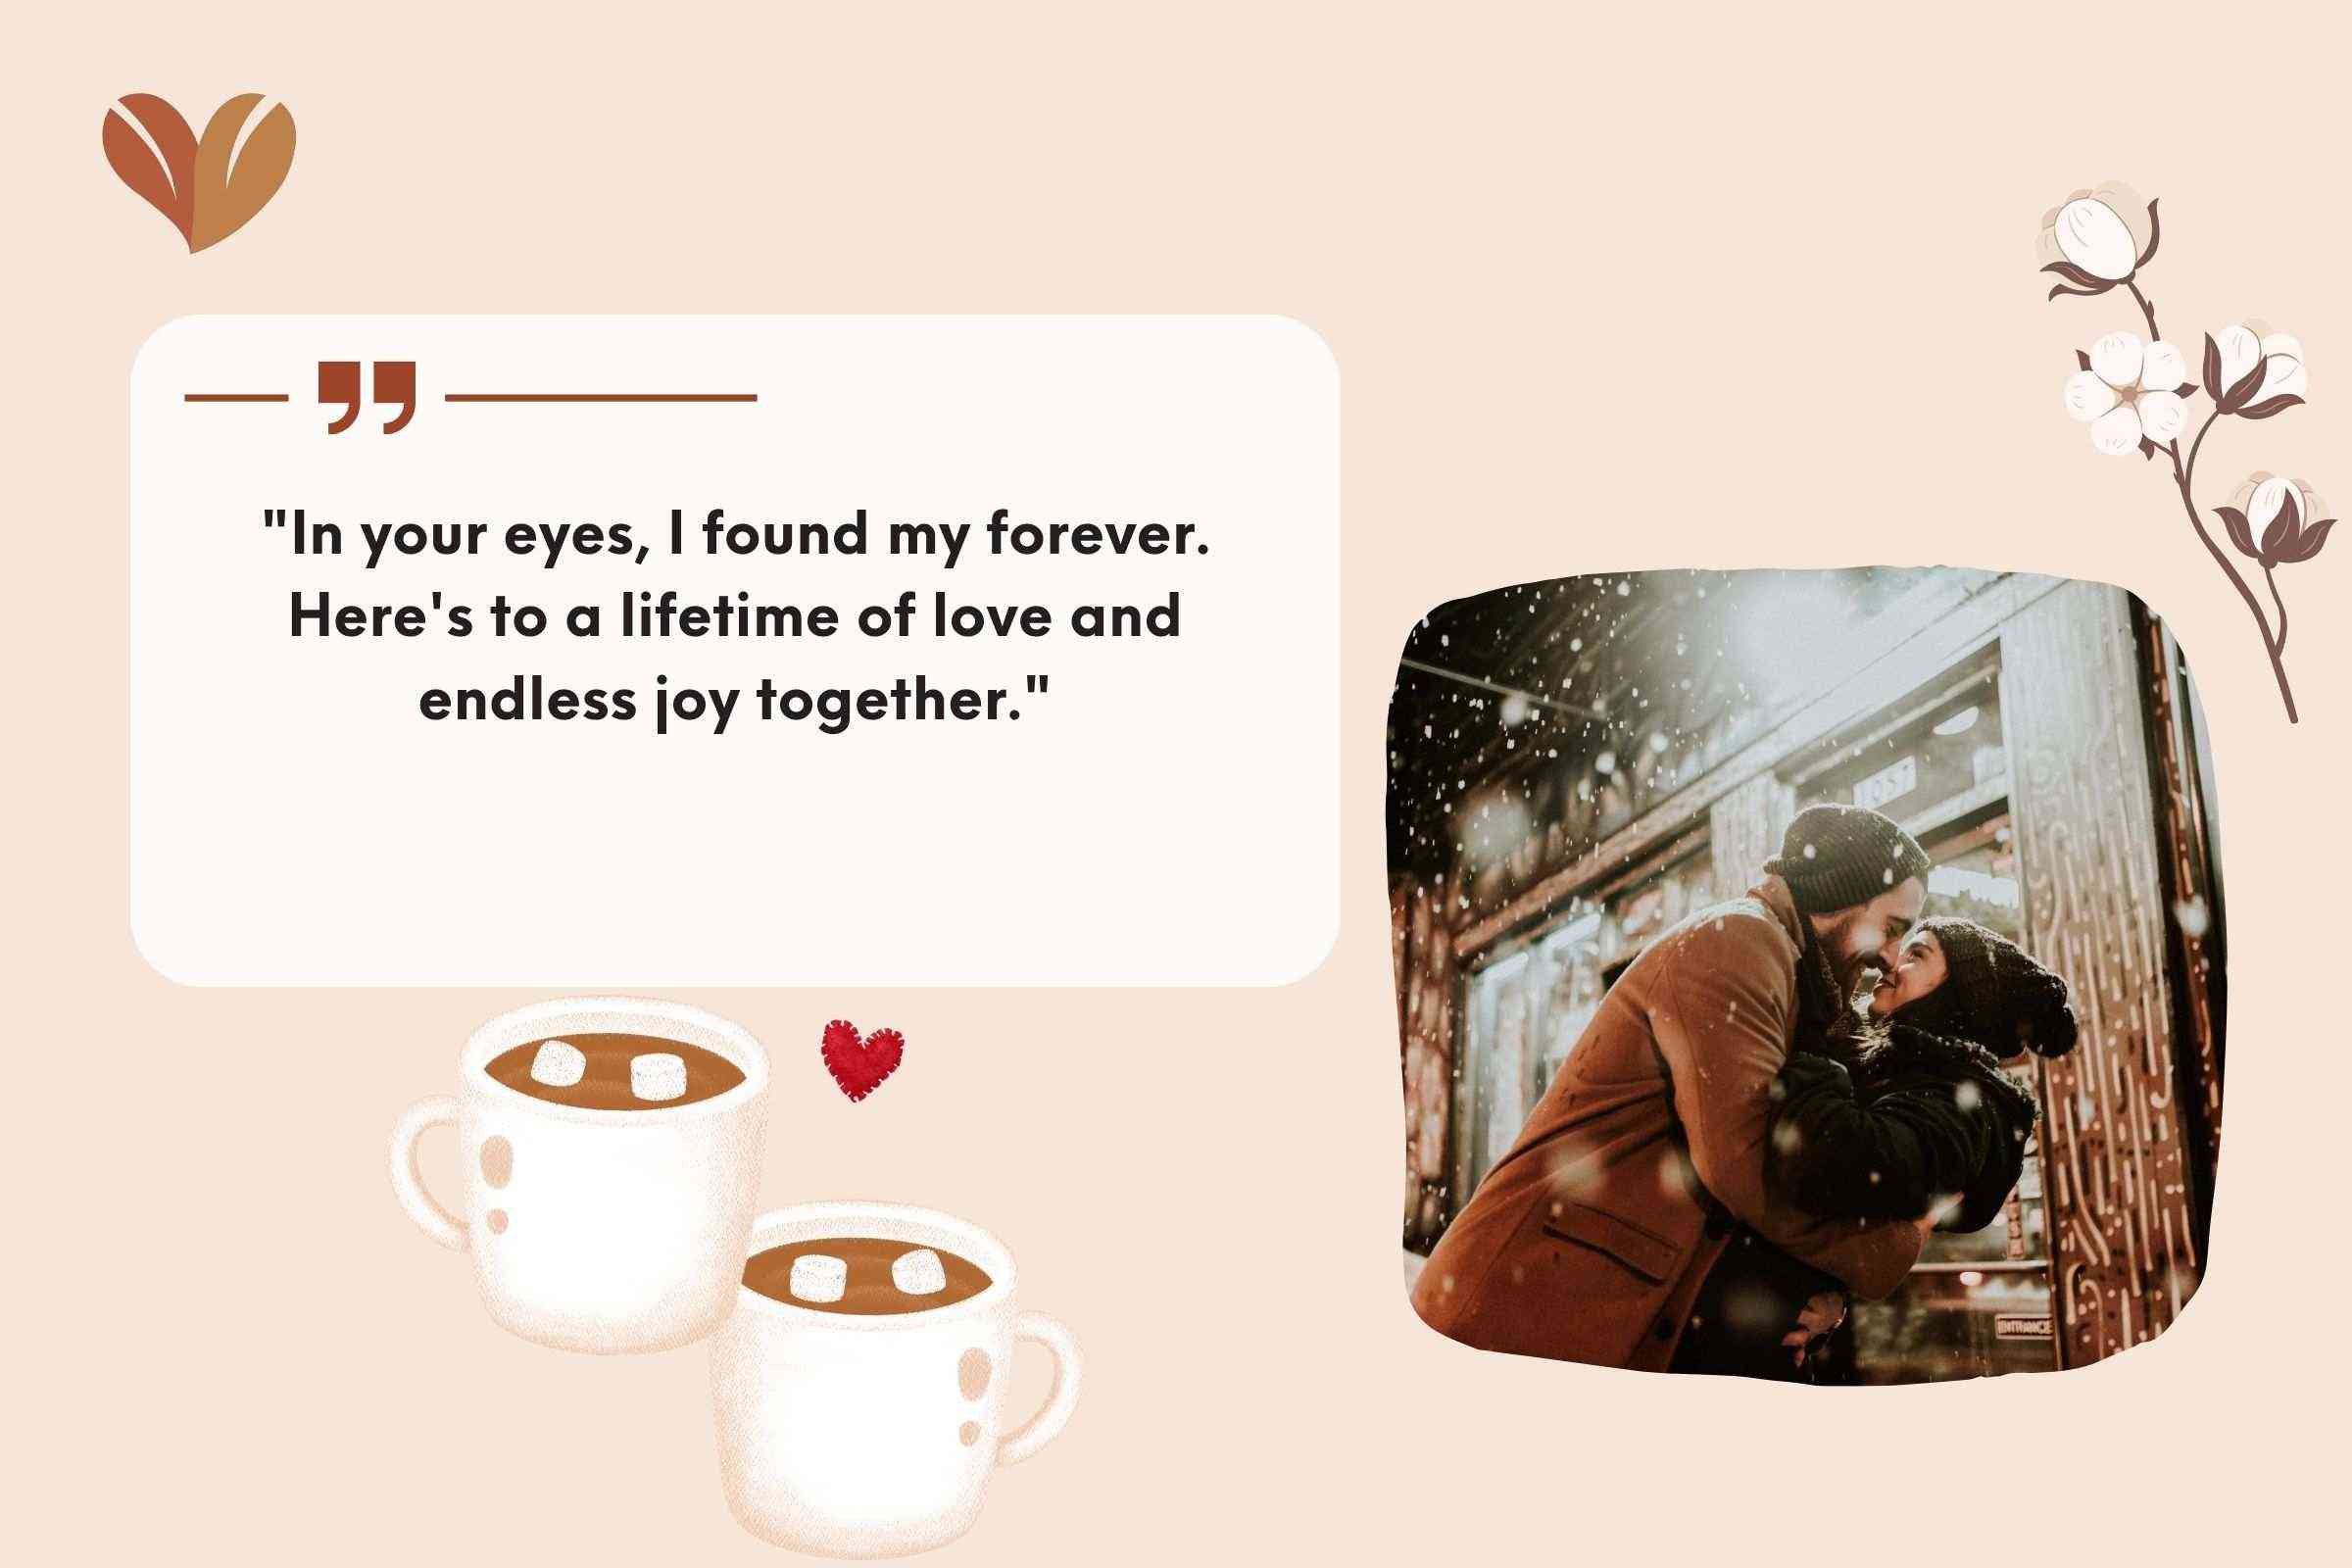 "In your eyes, I found my forever. Let our engagement be the prologue to our endless love story."